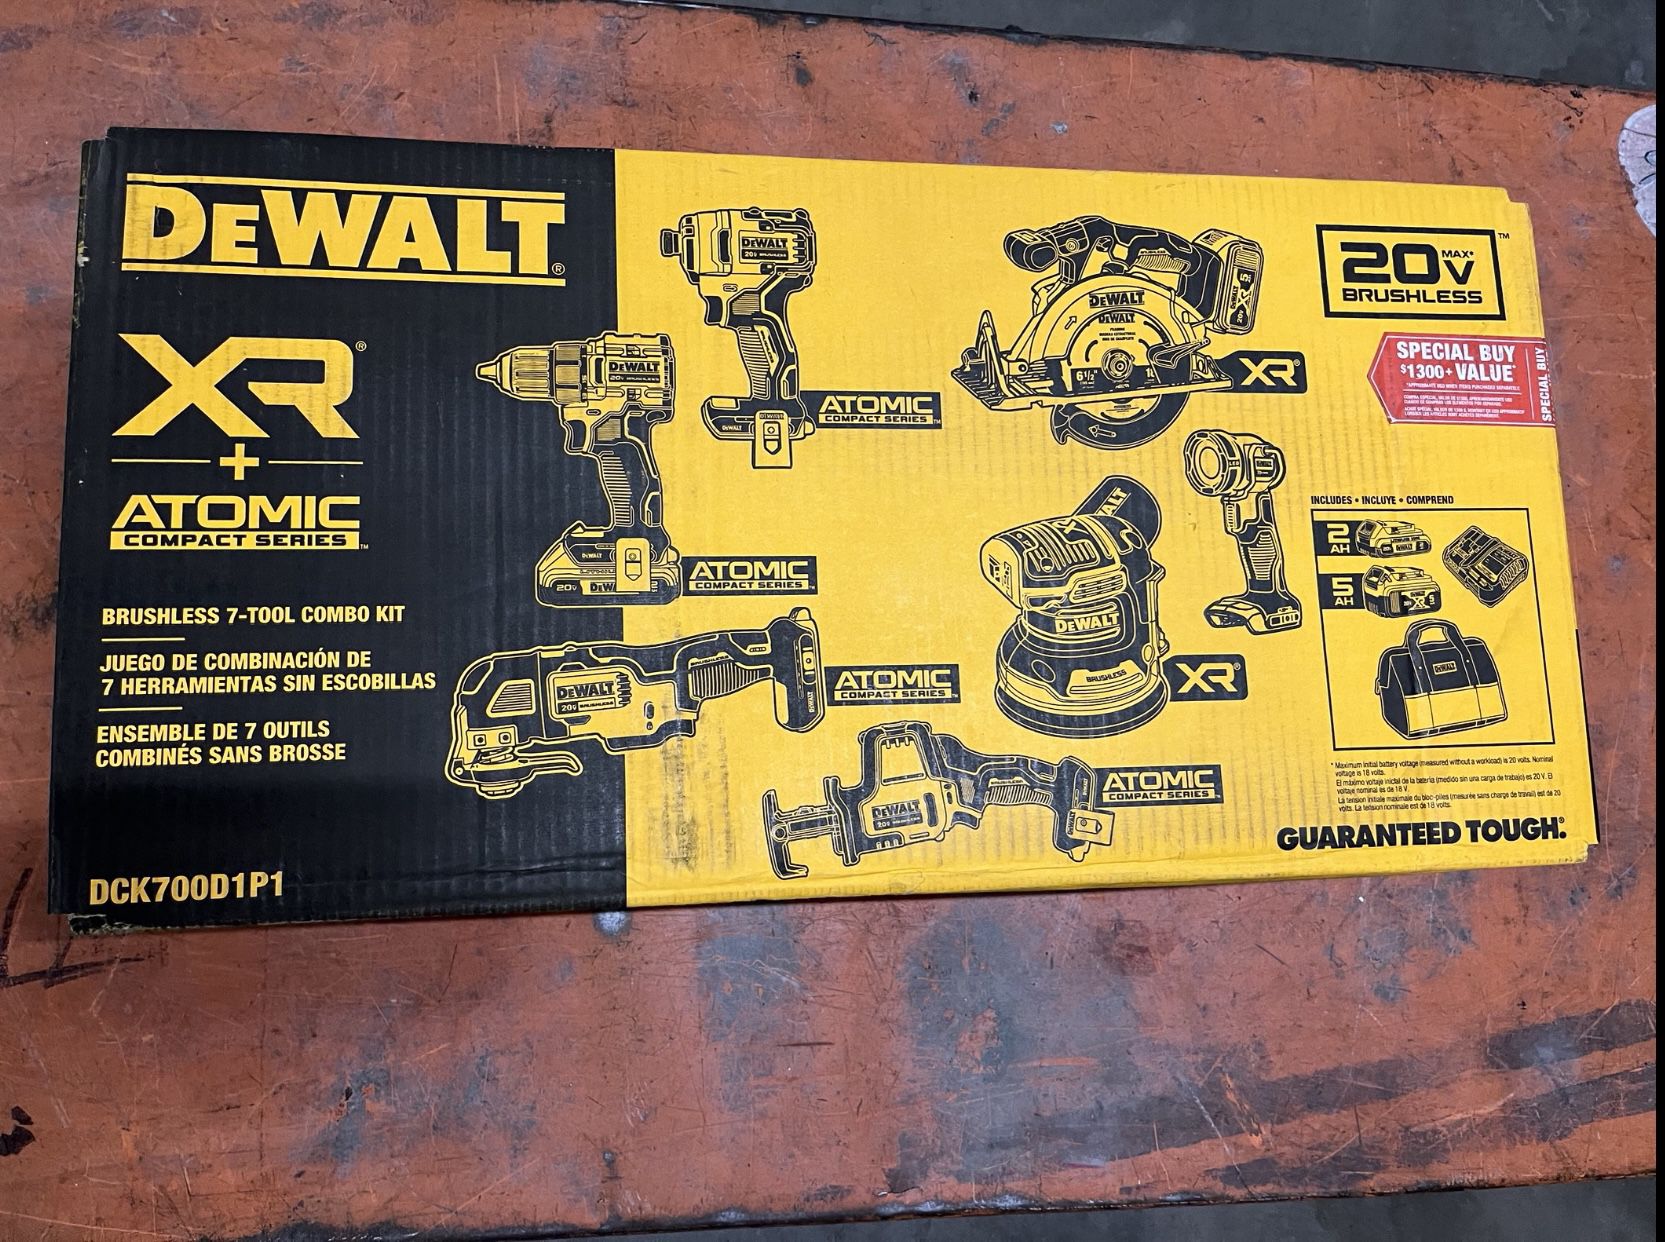 New Dewalt 20-Volt MAX Lithium-Ion Cordless 7-Tool Combo Kit with 2.0 Ah Battery, 5.0 Ah Battery and Charger